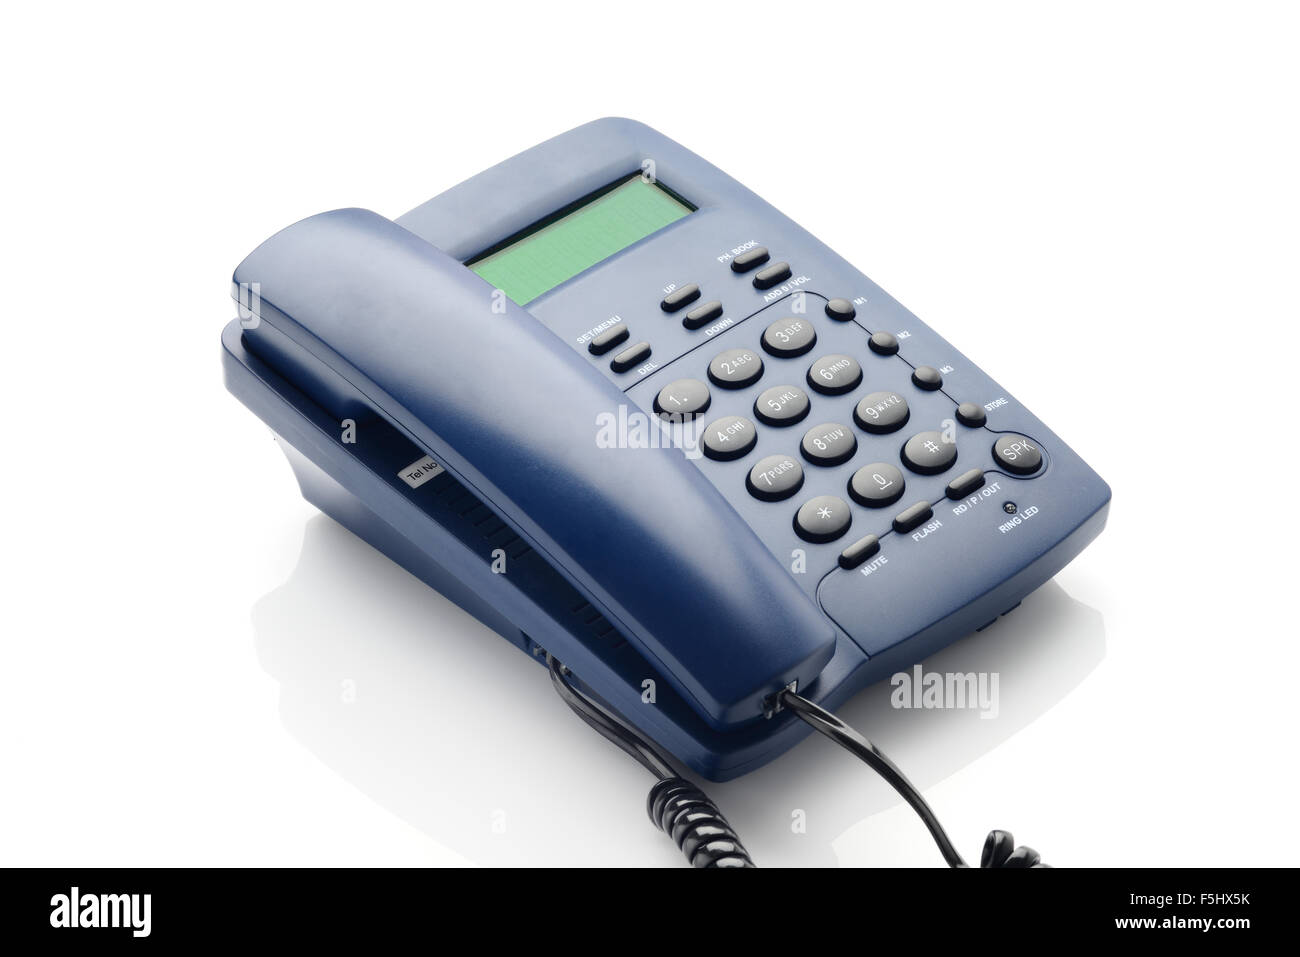 Modern Telephone in Blue Color over white background Stock Photo